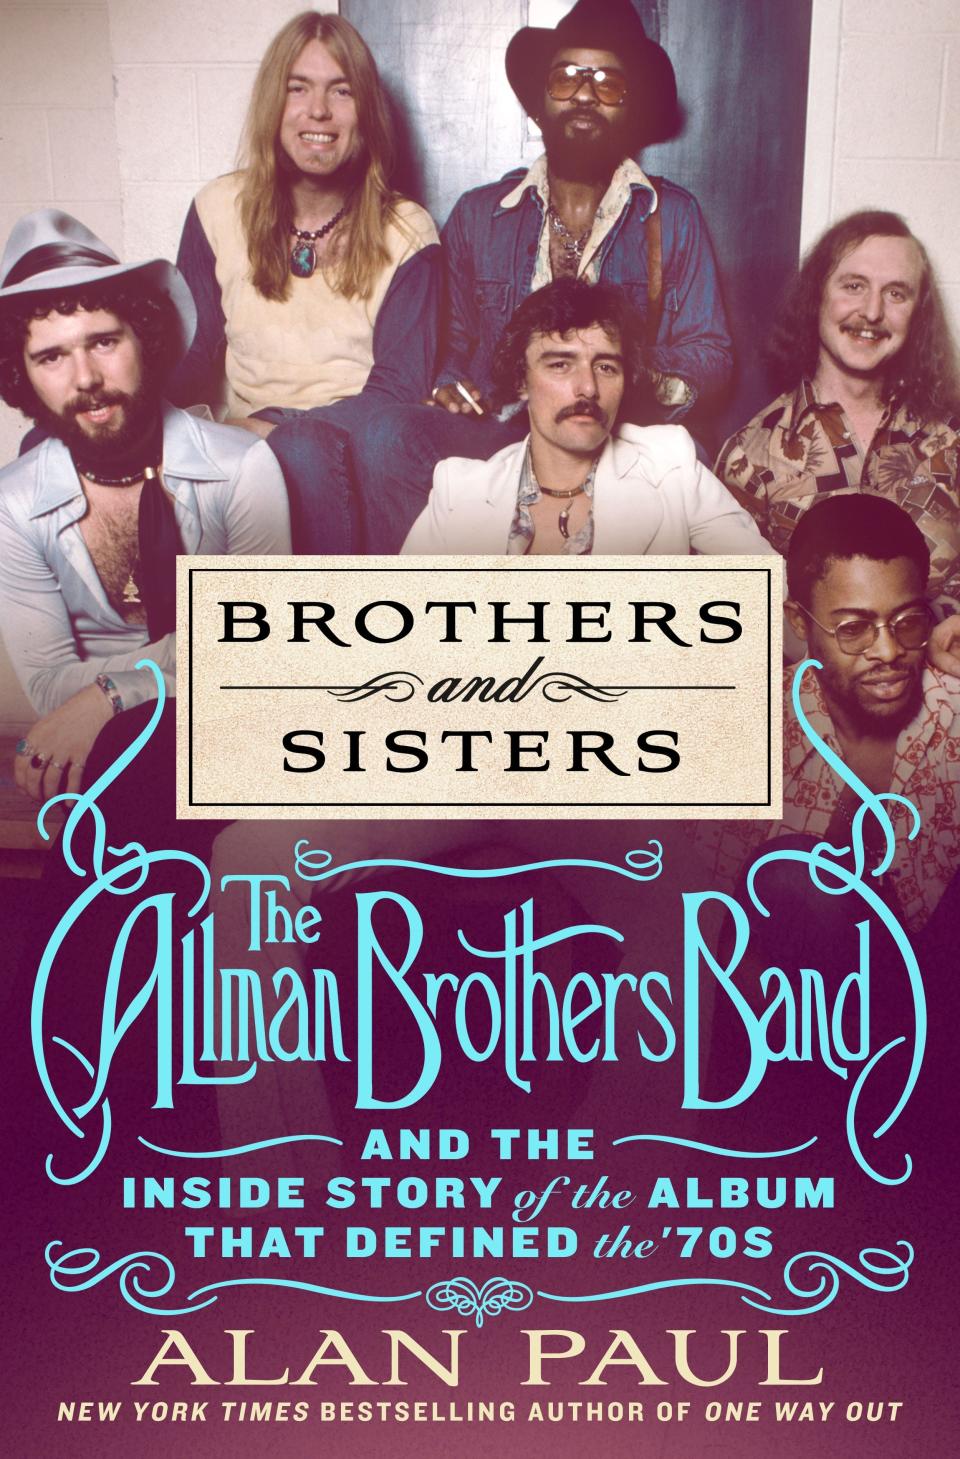 Alan Paul's book "Brothers and Sister: The Allman Brothers Band and the Inside Story of the Album That Defined the 70s" will be published by St. Martin’s Press on July 25, 2023.